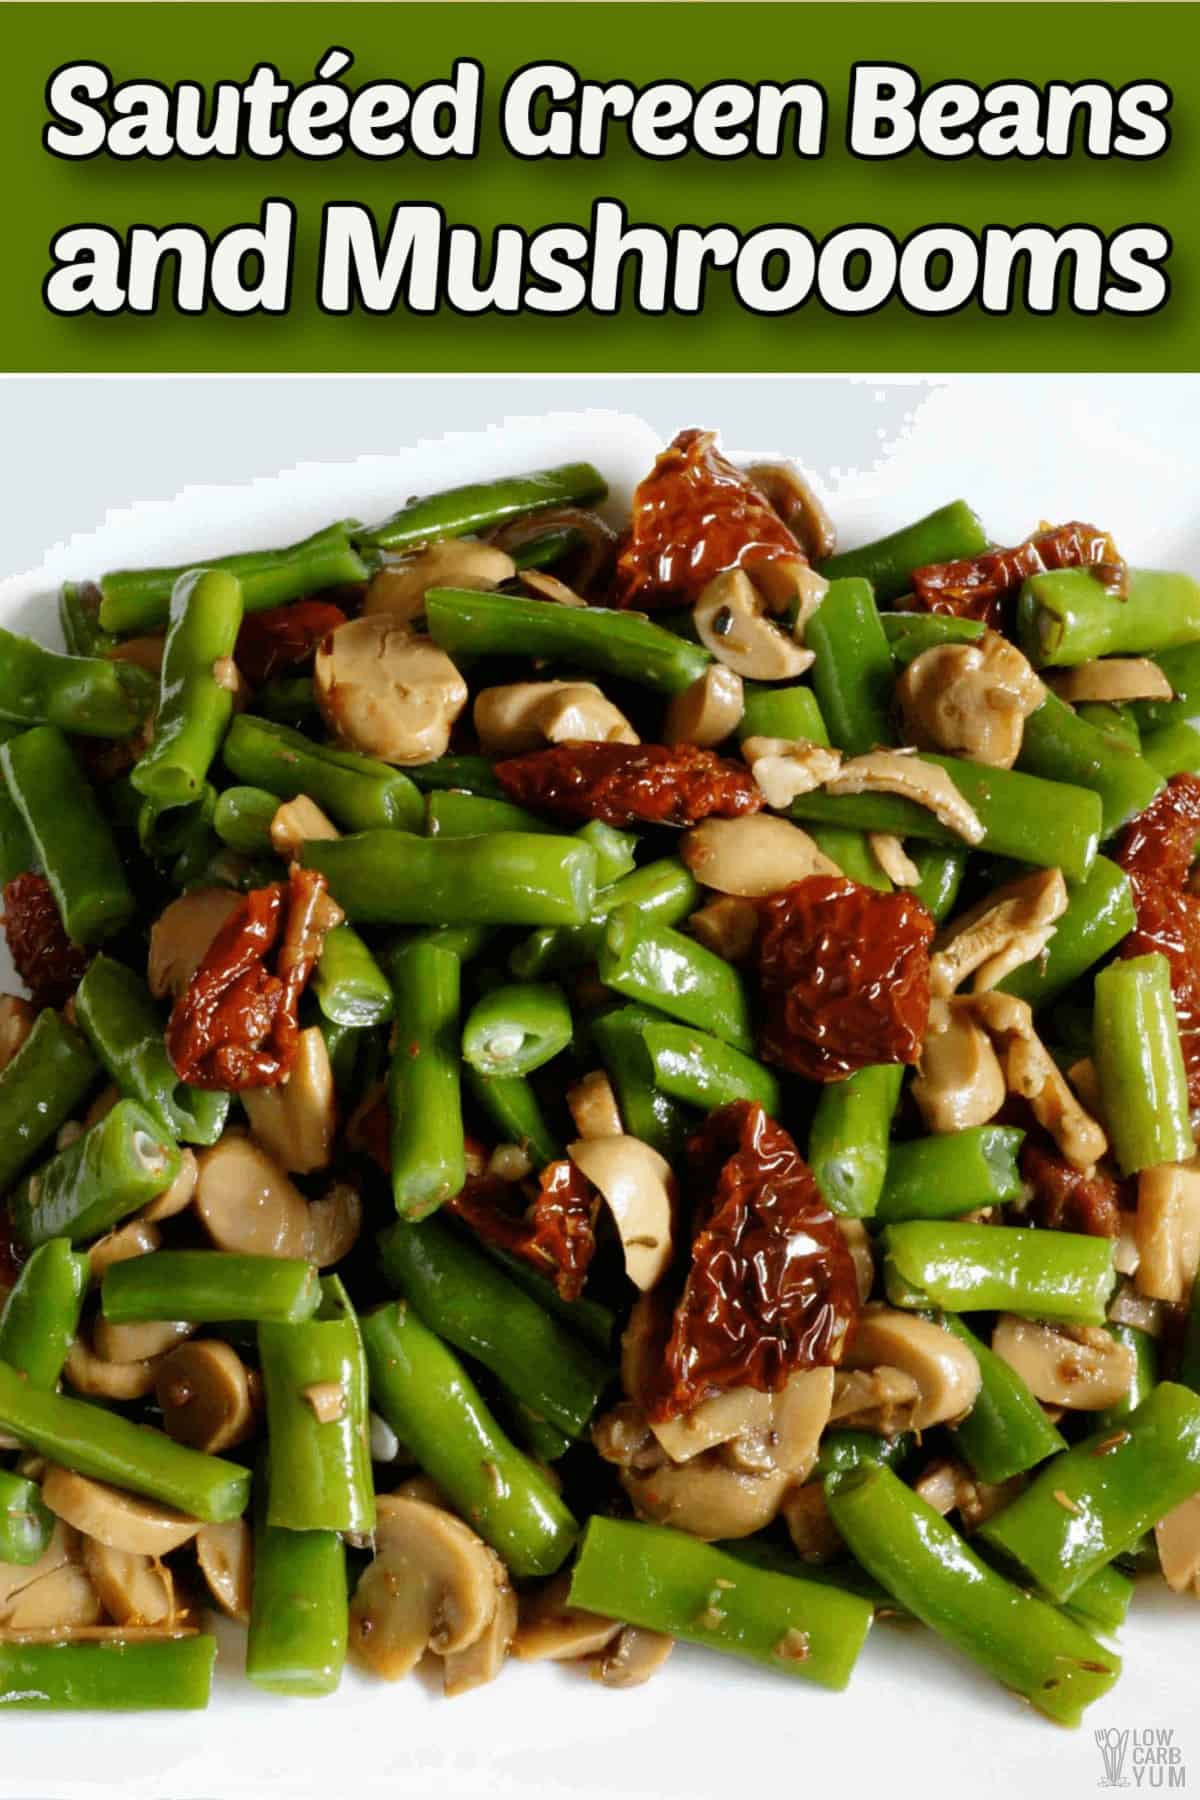 sauteed green beans and mushrooms recipe pintrest image